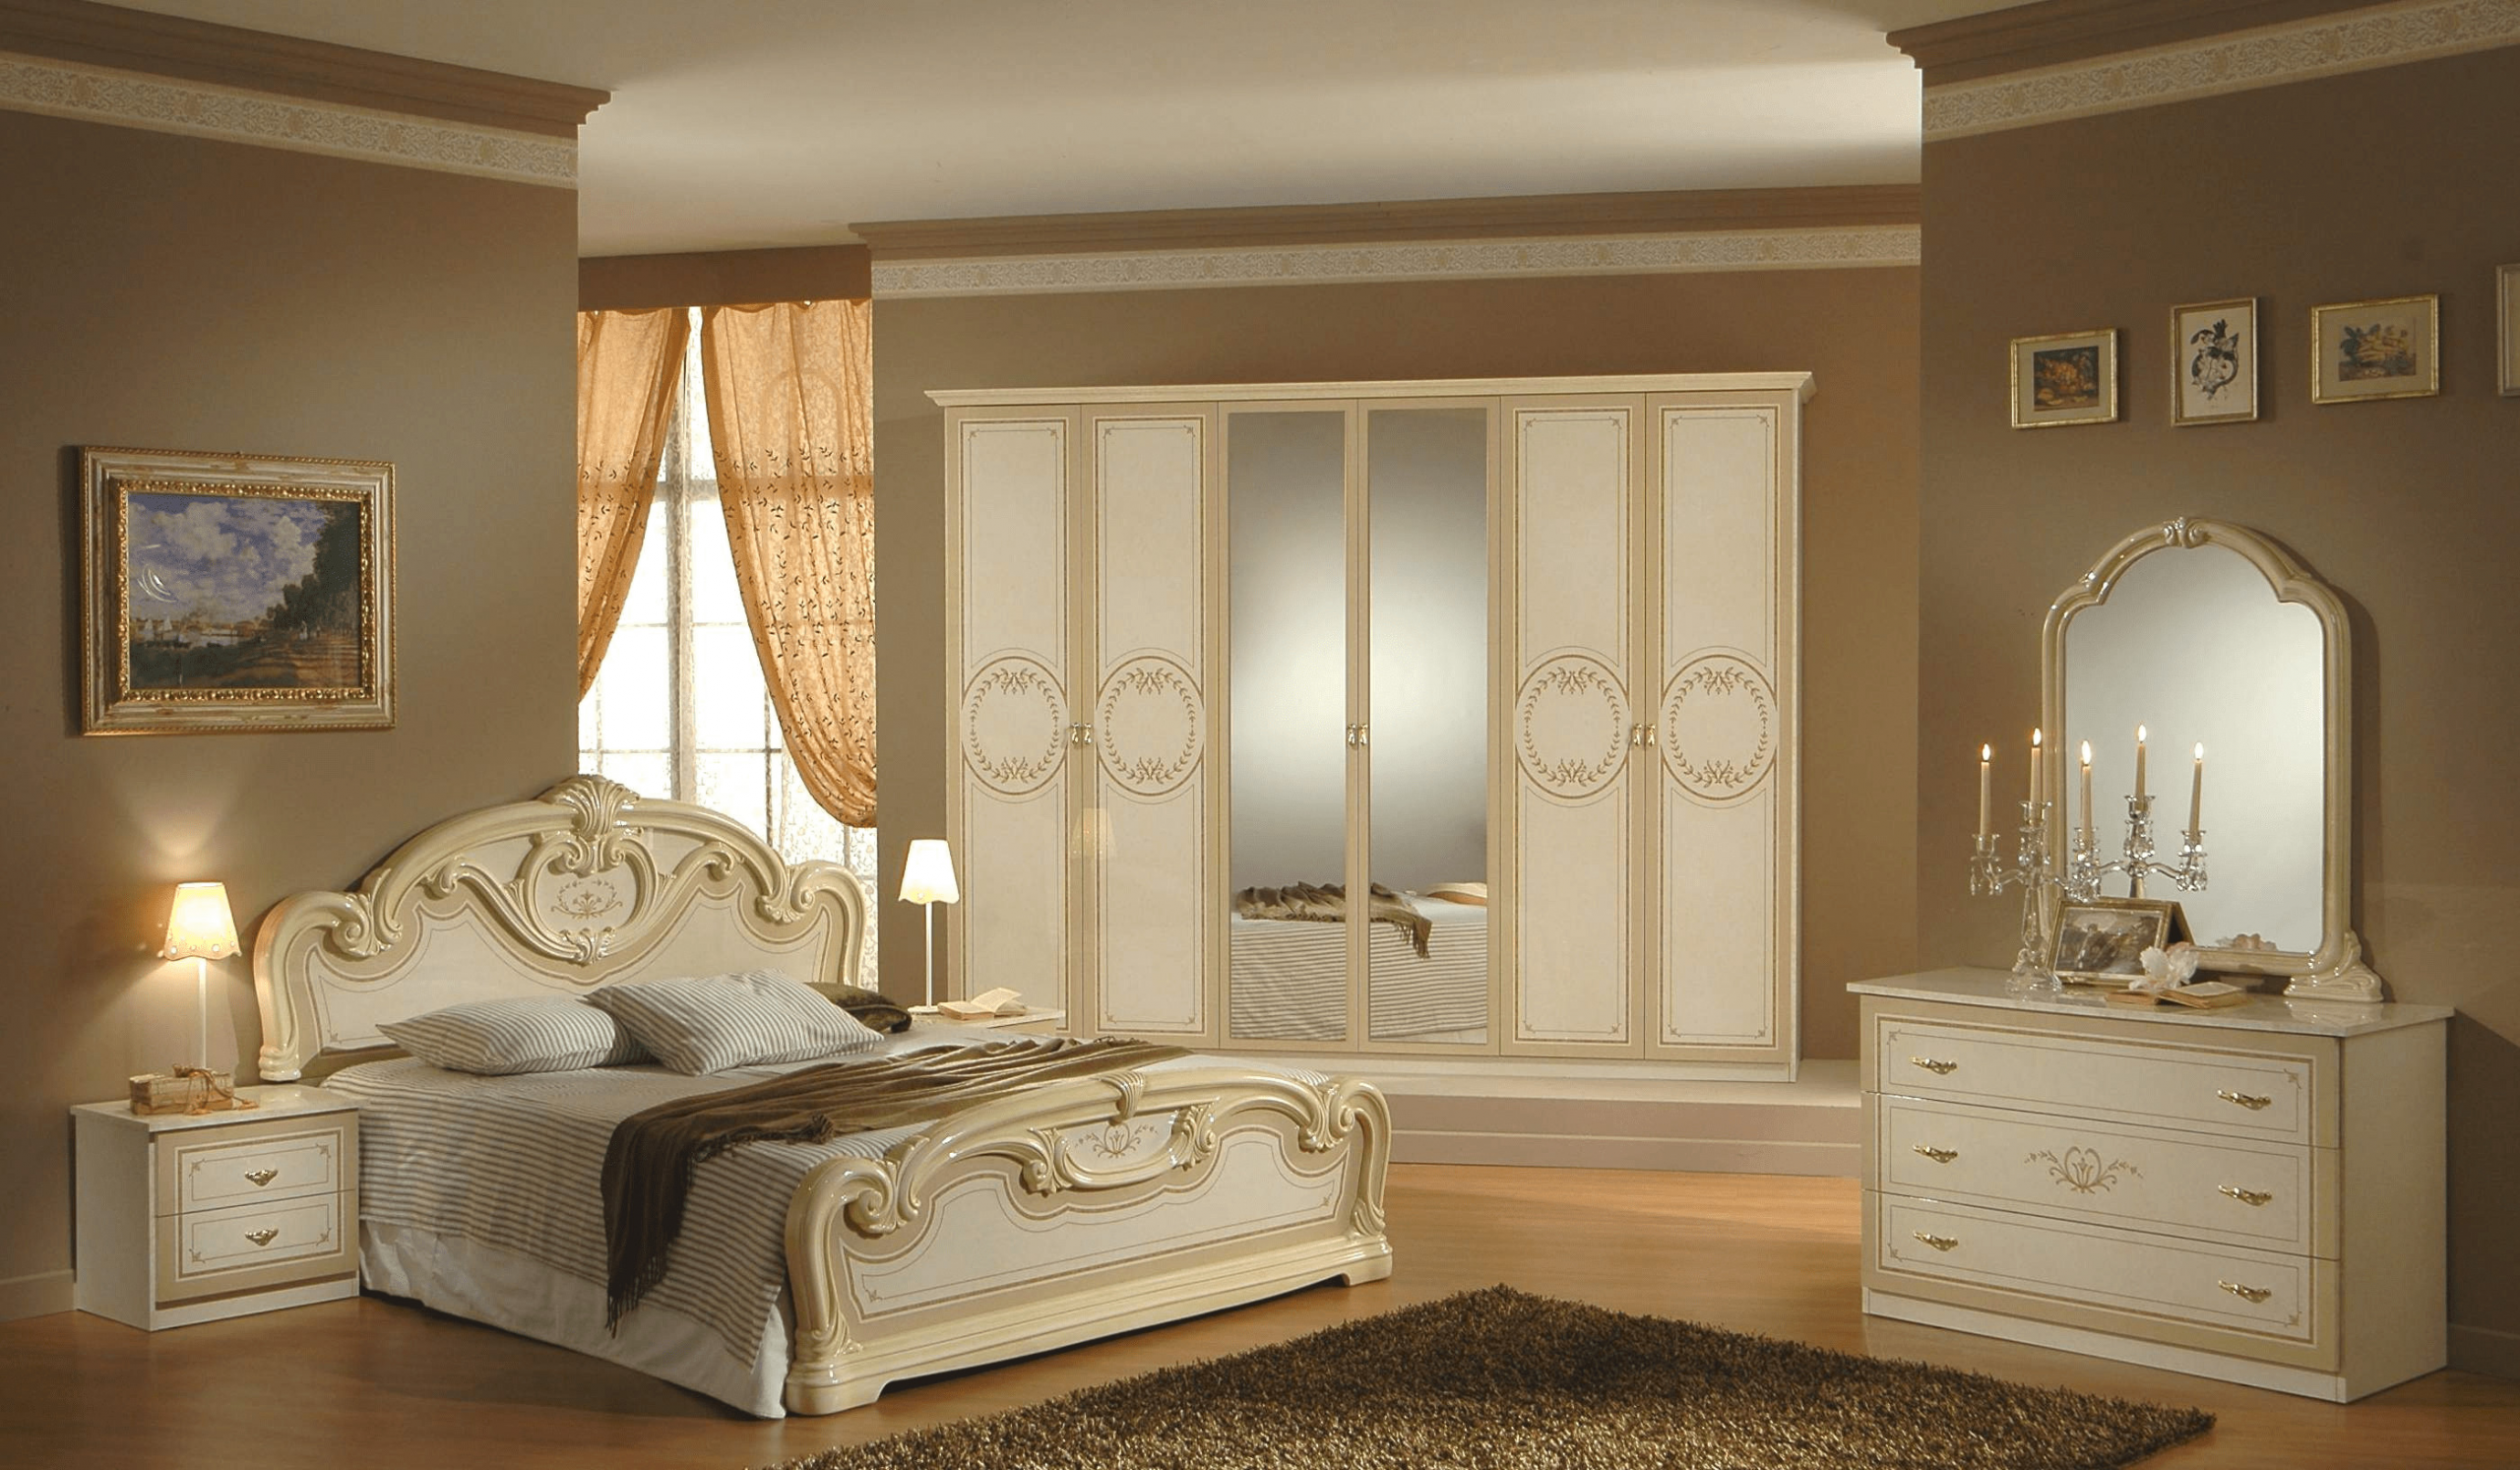 Cream Color Bedroom Set
 Top 5 Best Paint Color for Bedroom with Cherry Furniture